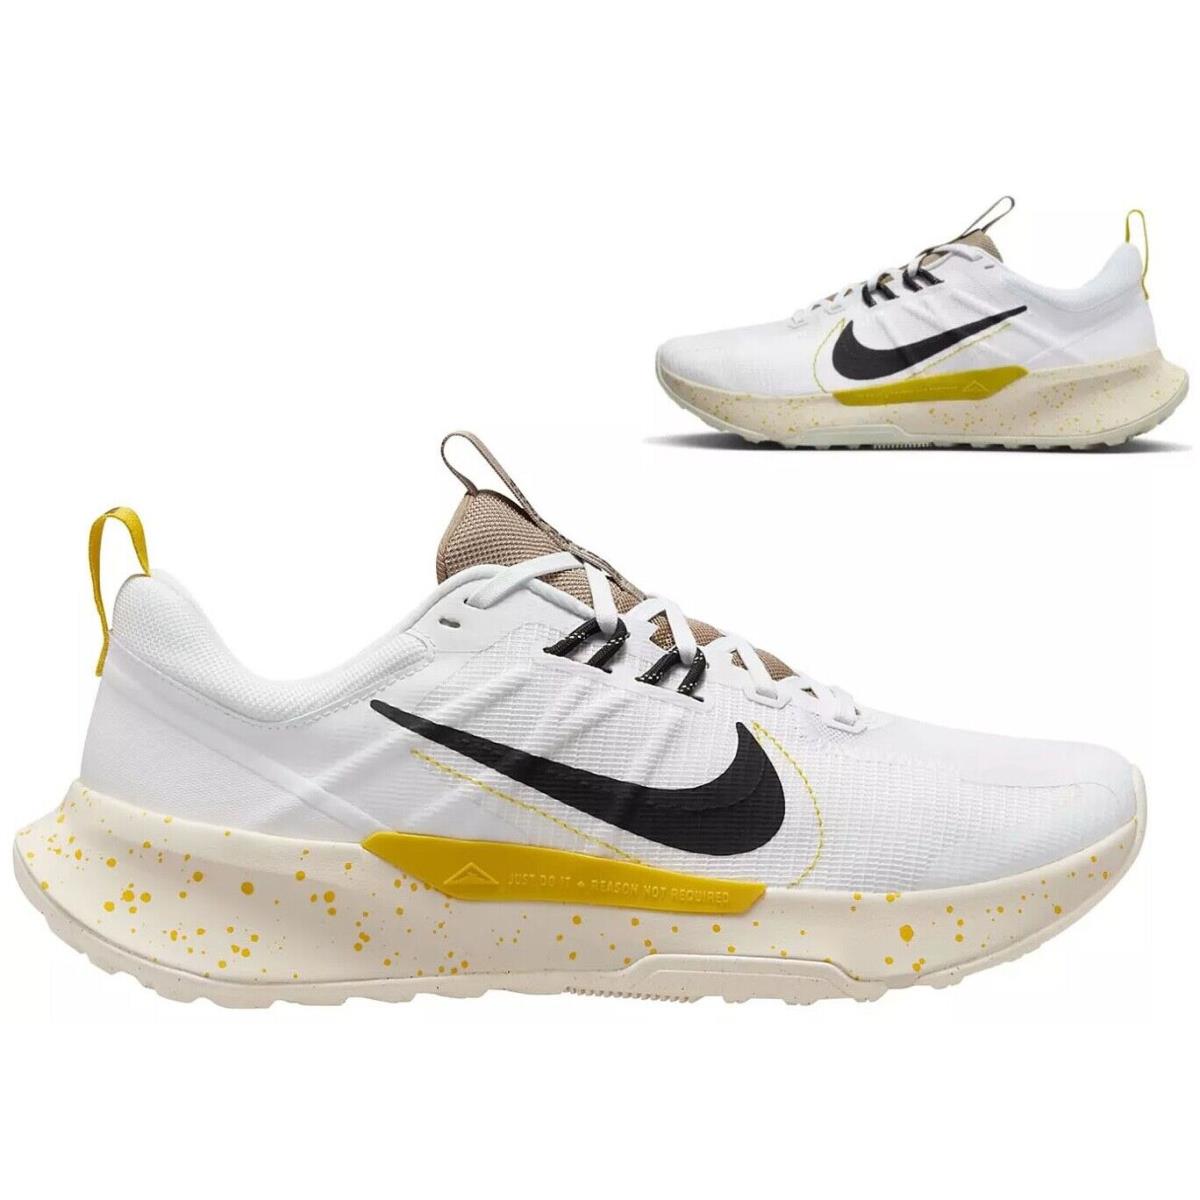 Nike Juniper Trail Athletic Sneakers Running Shoes Mens White All Sizes